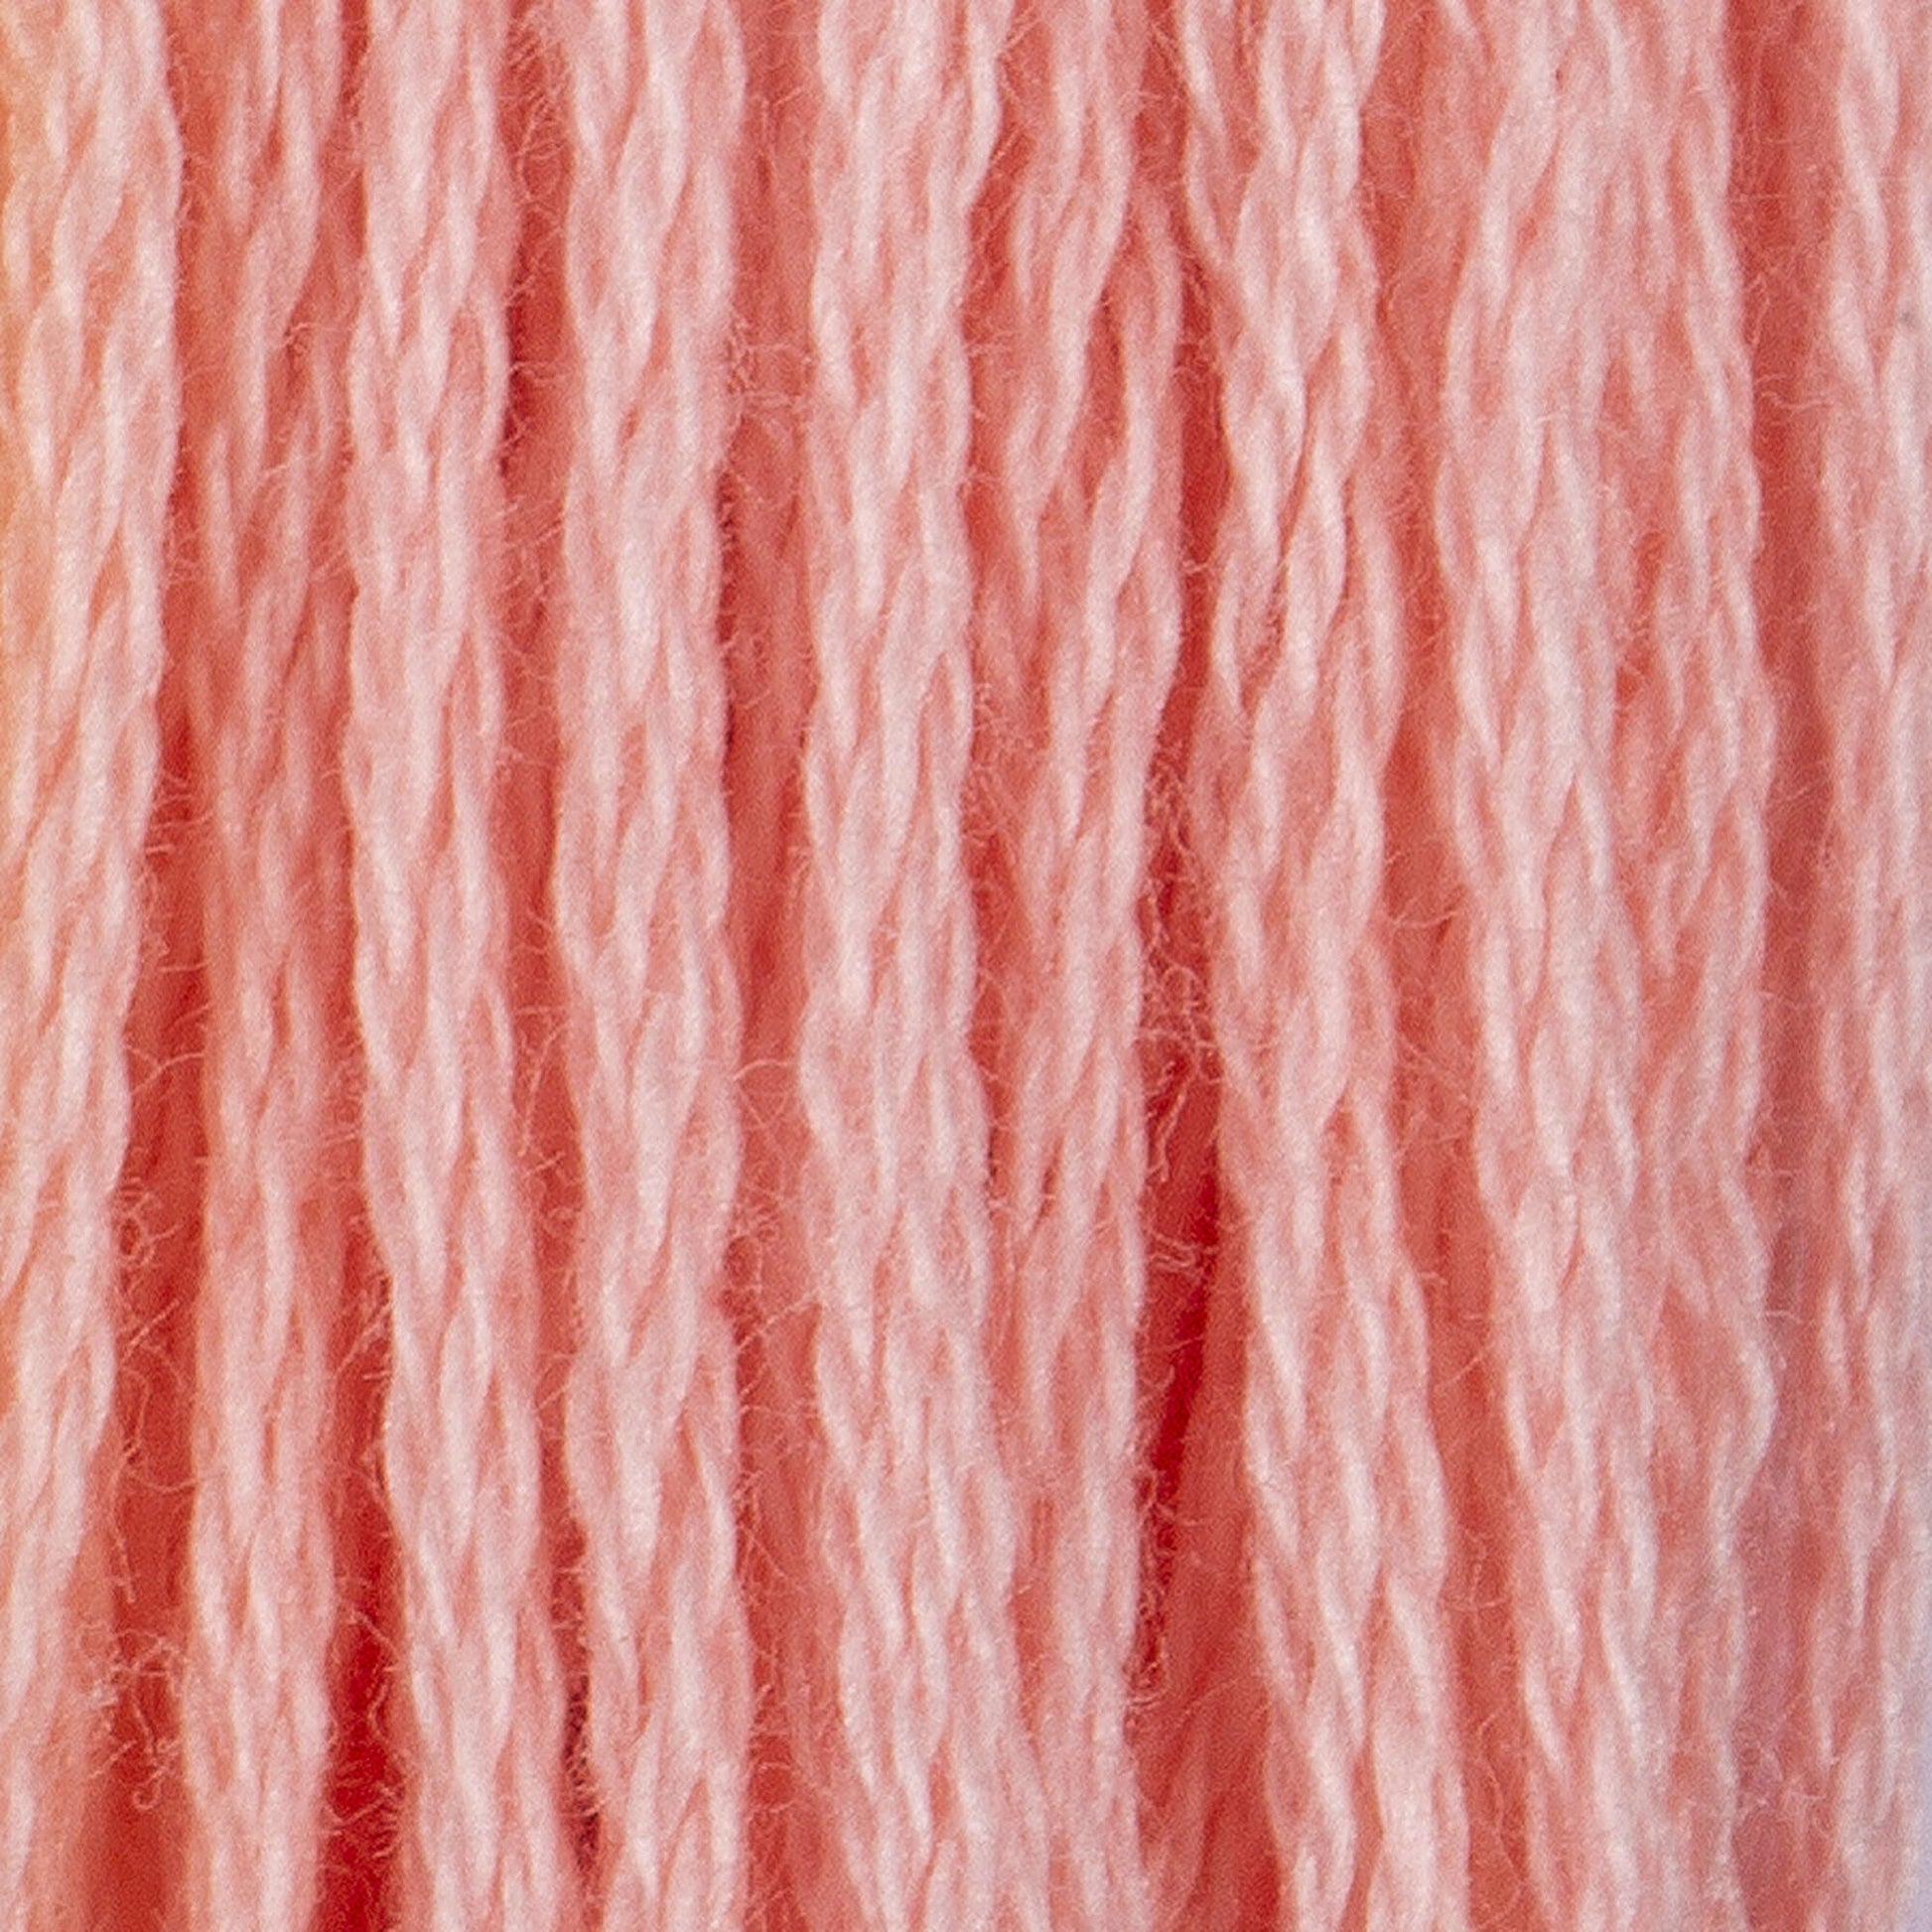 Coats & Clark Cotton Embroidery Floss Baby Pink